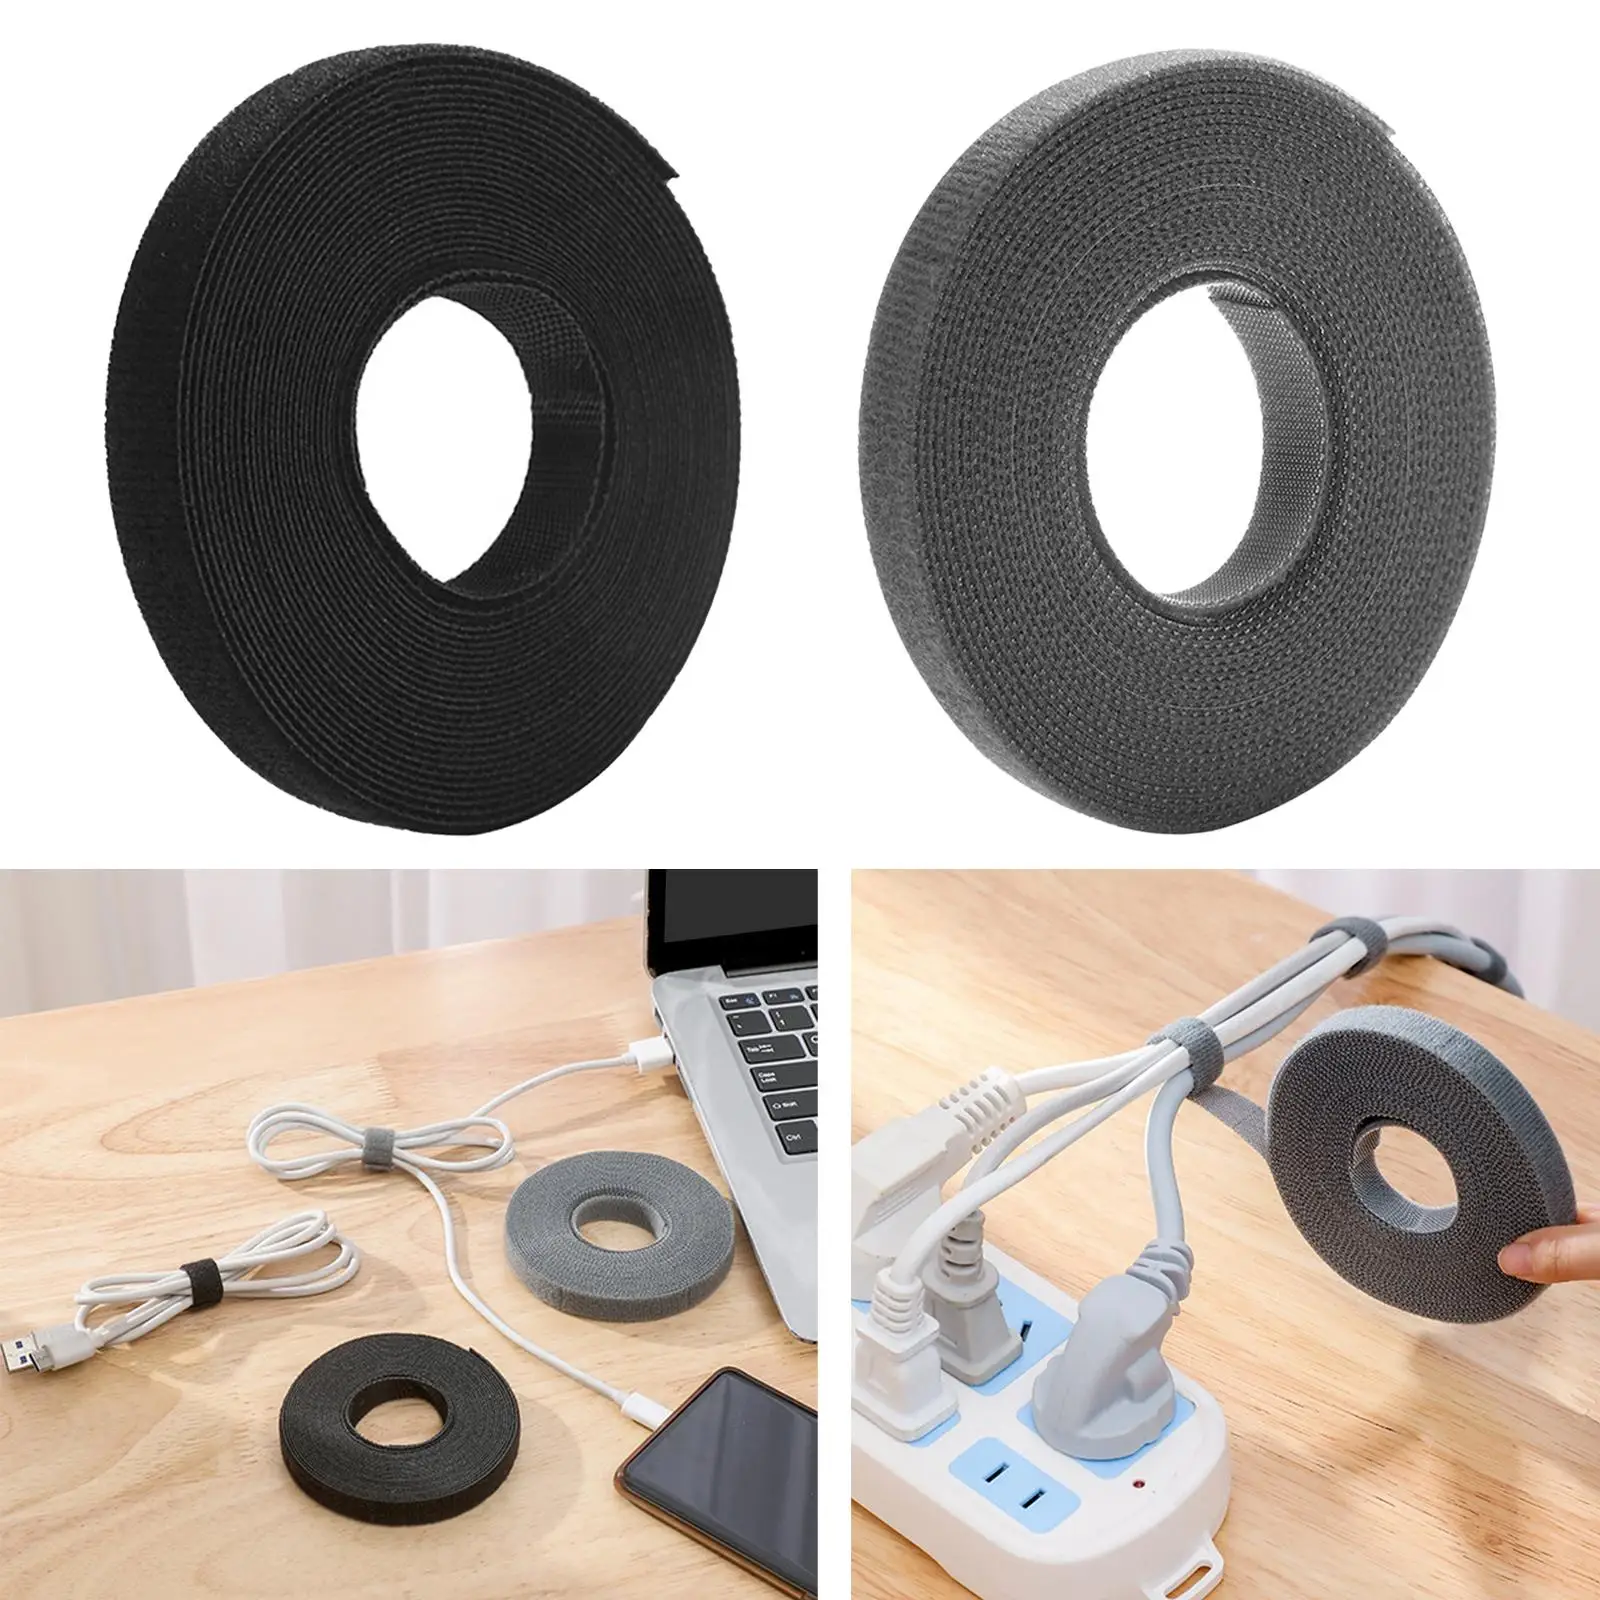 2 Pieces Multifunctional Pasting Adhesive Tape Freely Tailor Storage Accessory for Fishing Rod Headphone Charging Cables Curtain